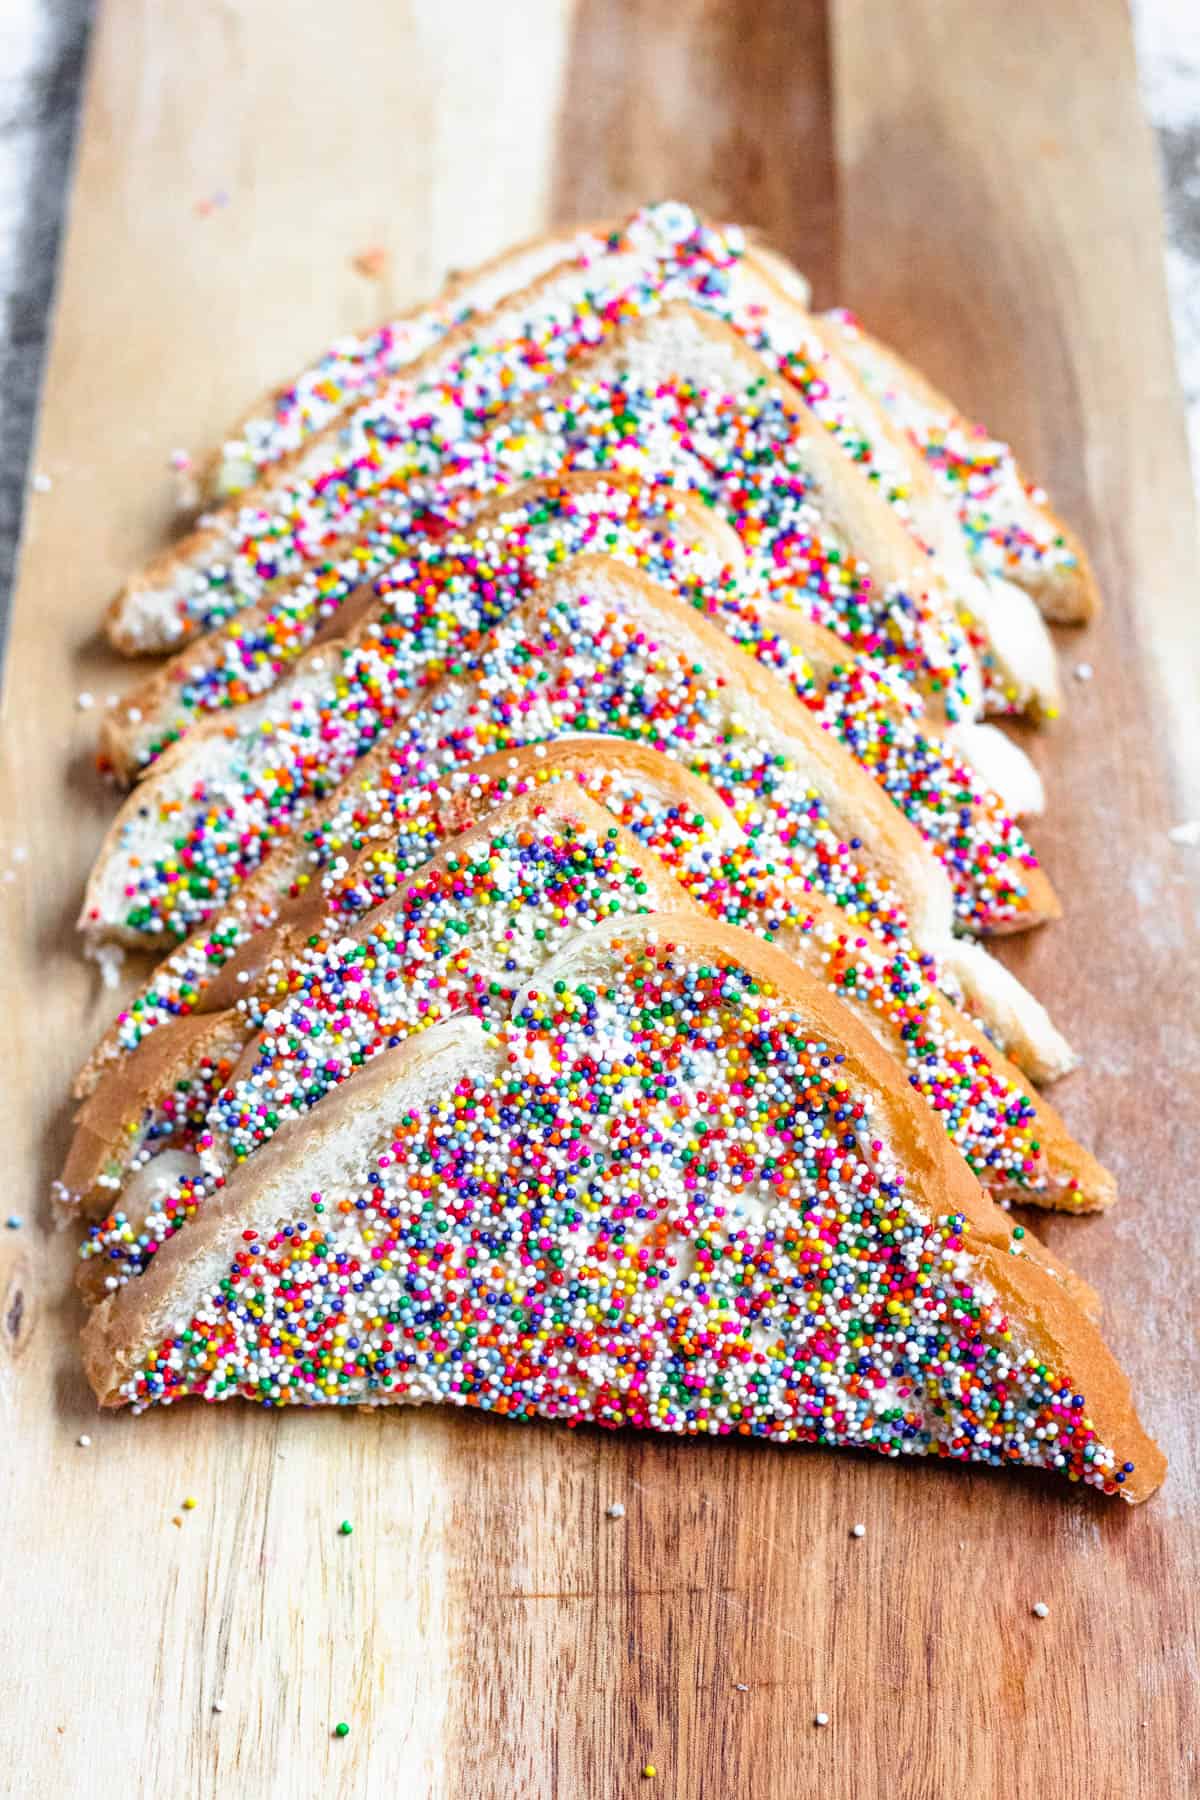 Pieces of Fairy Bread lined up on a board